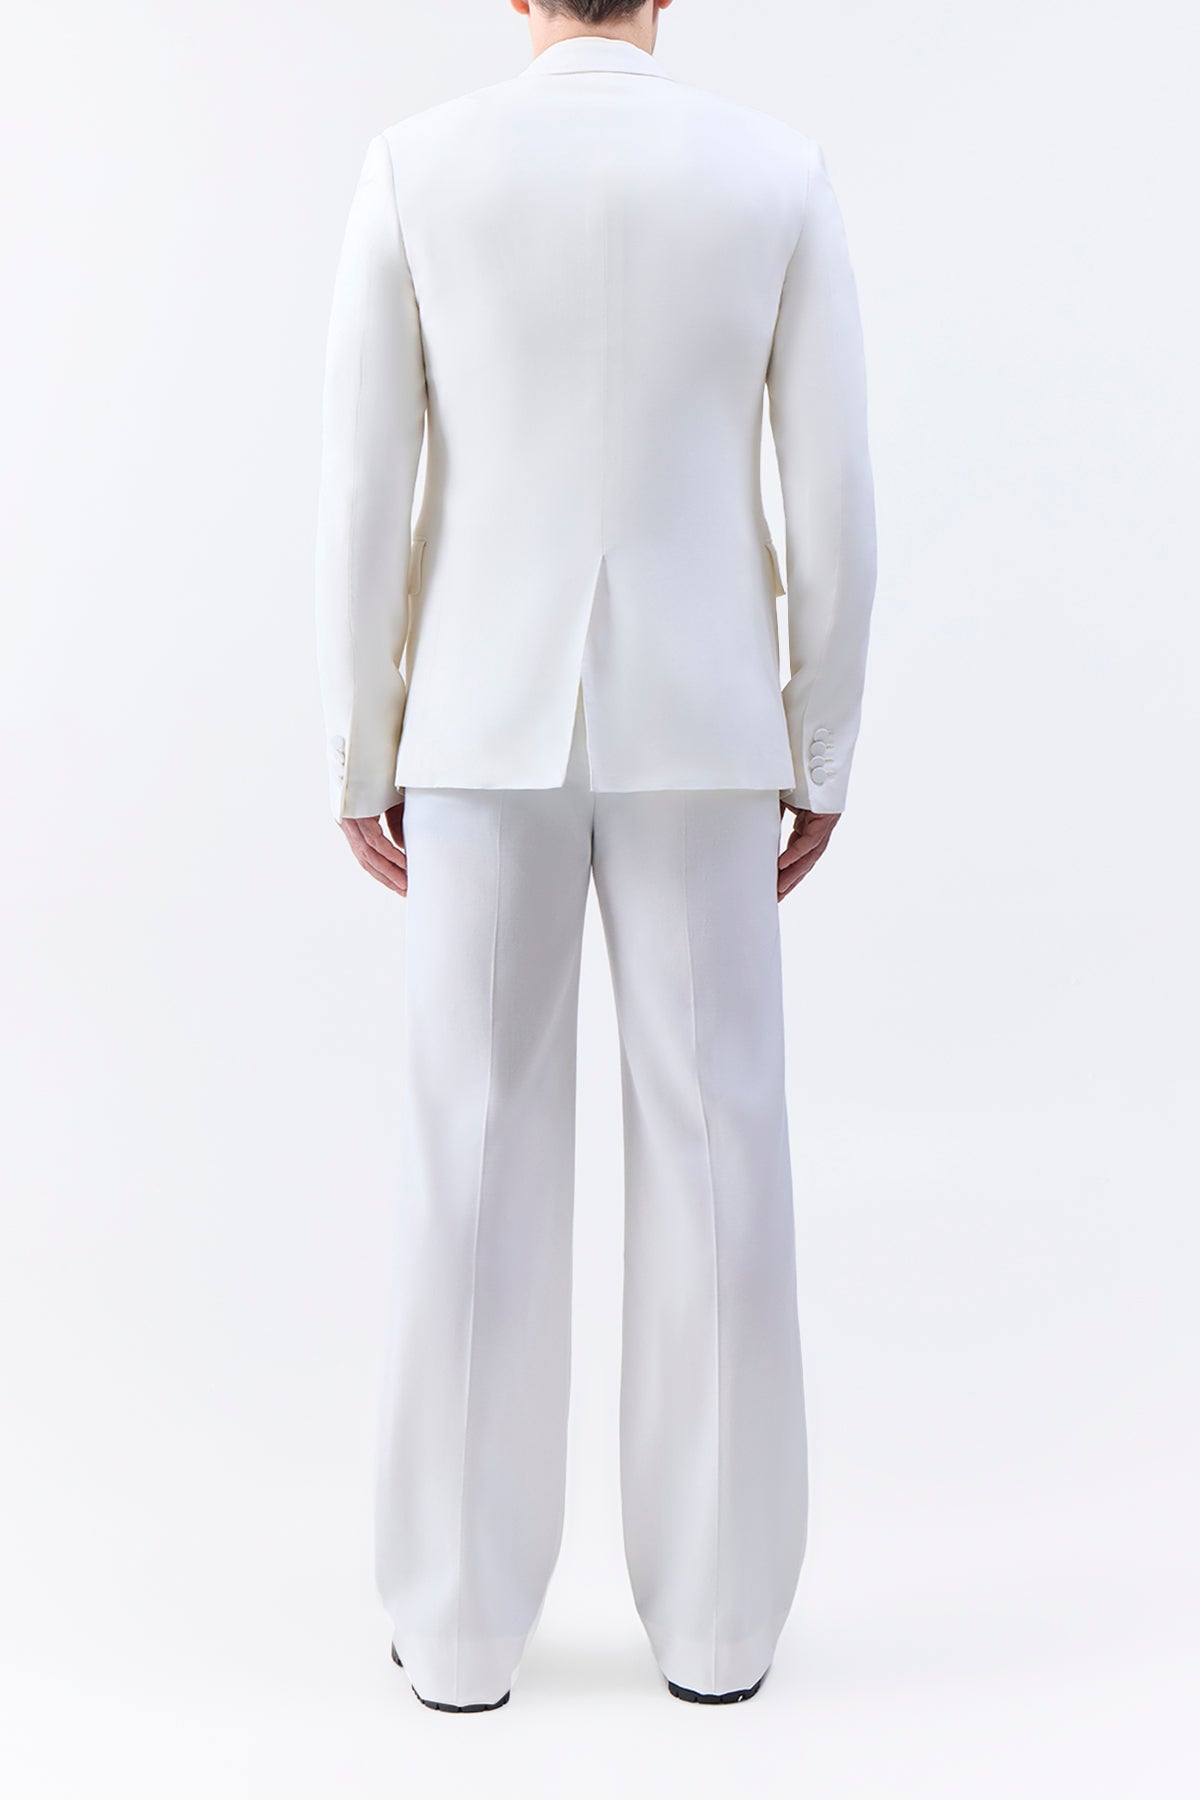 Vista Pant in Ivory Wool Twill